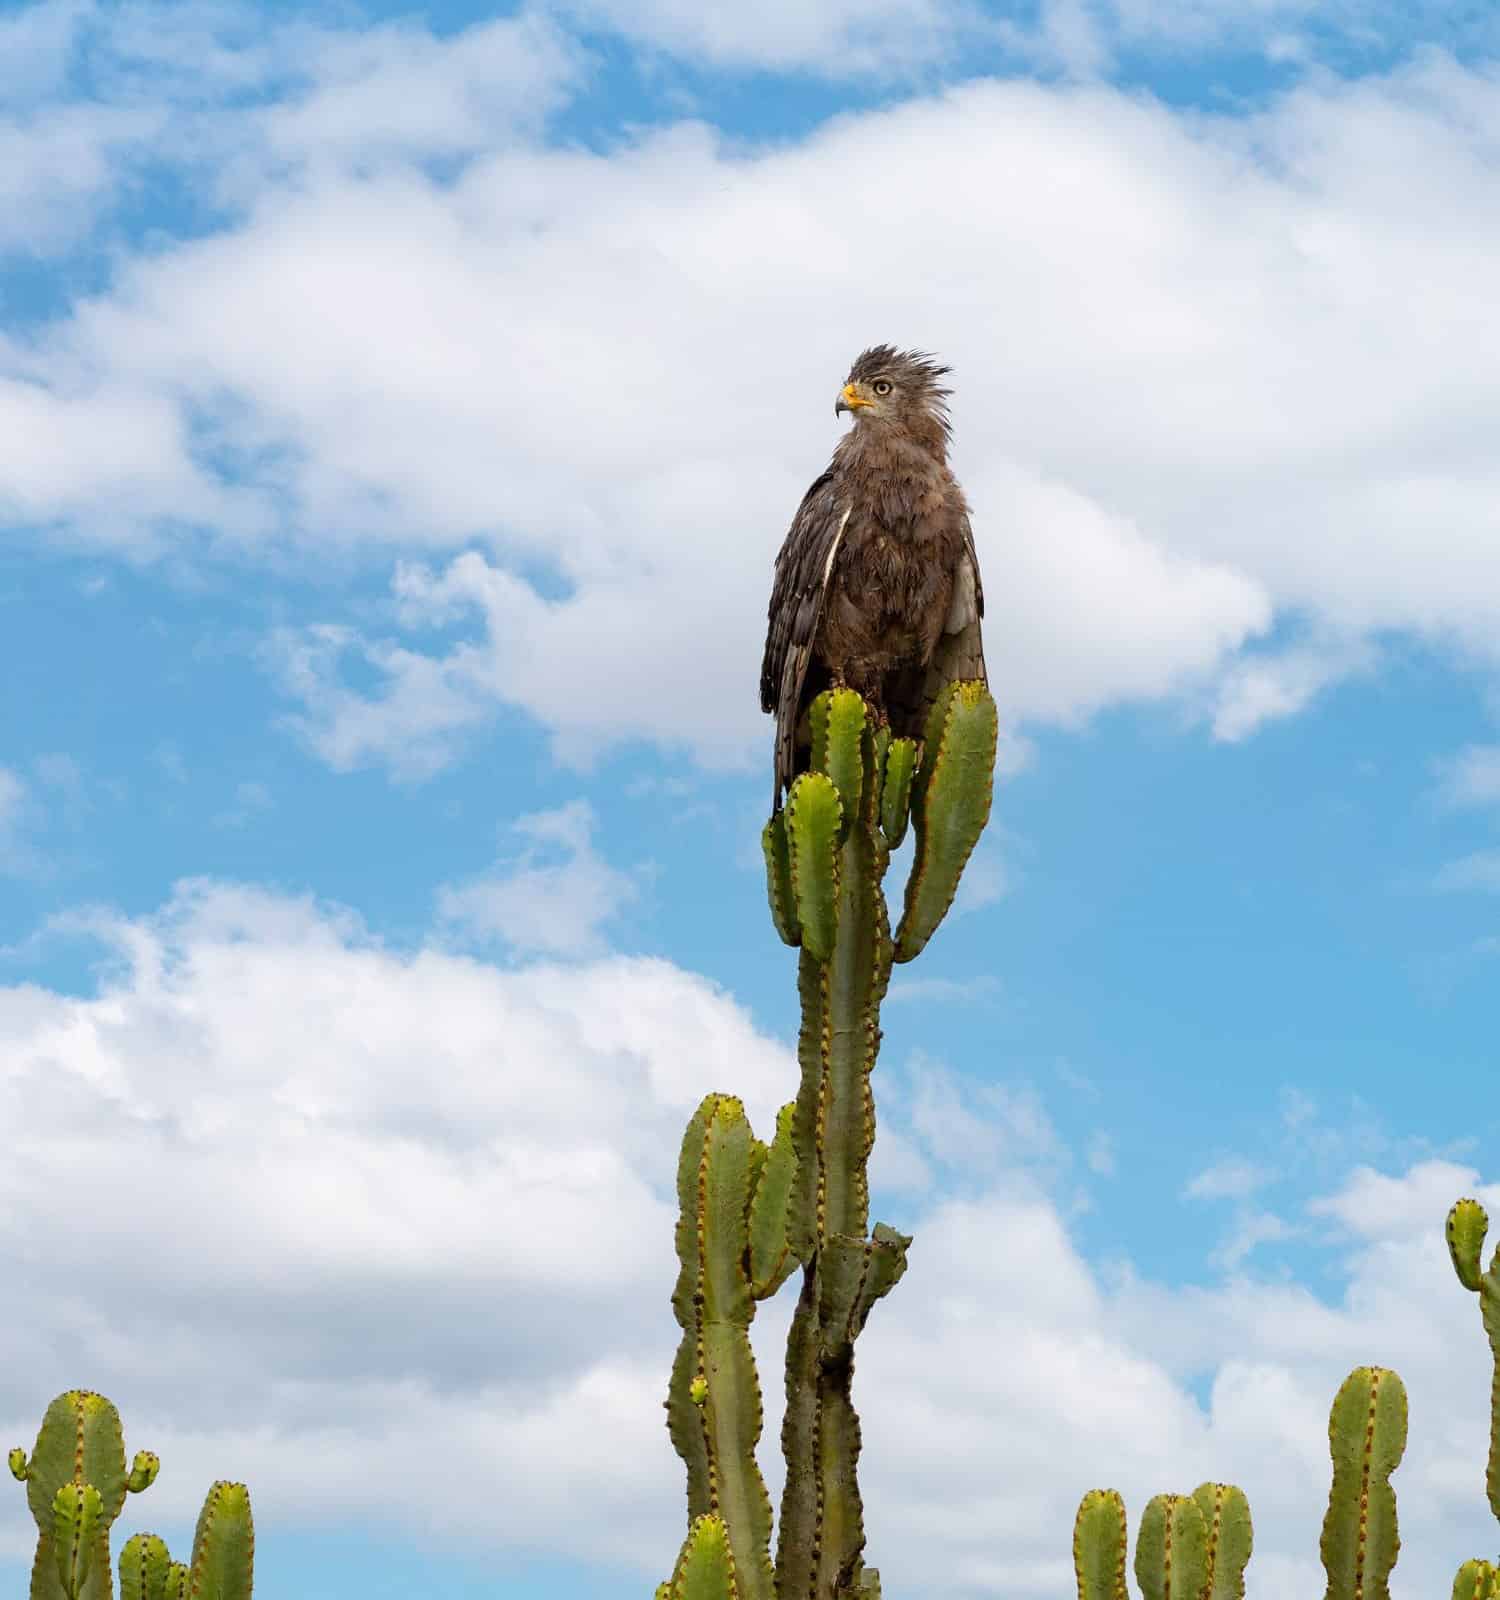 Juvenile tawny eagle, aquila rapax, perched on Euphorbia ingens cactus, or candelabra tree, against summer sky background. Tawny eagles are vulnerable in the wild with numbers decreasing.